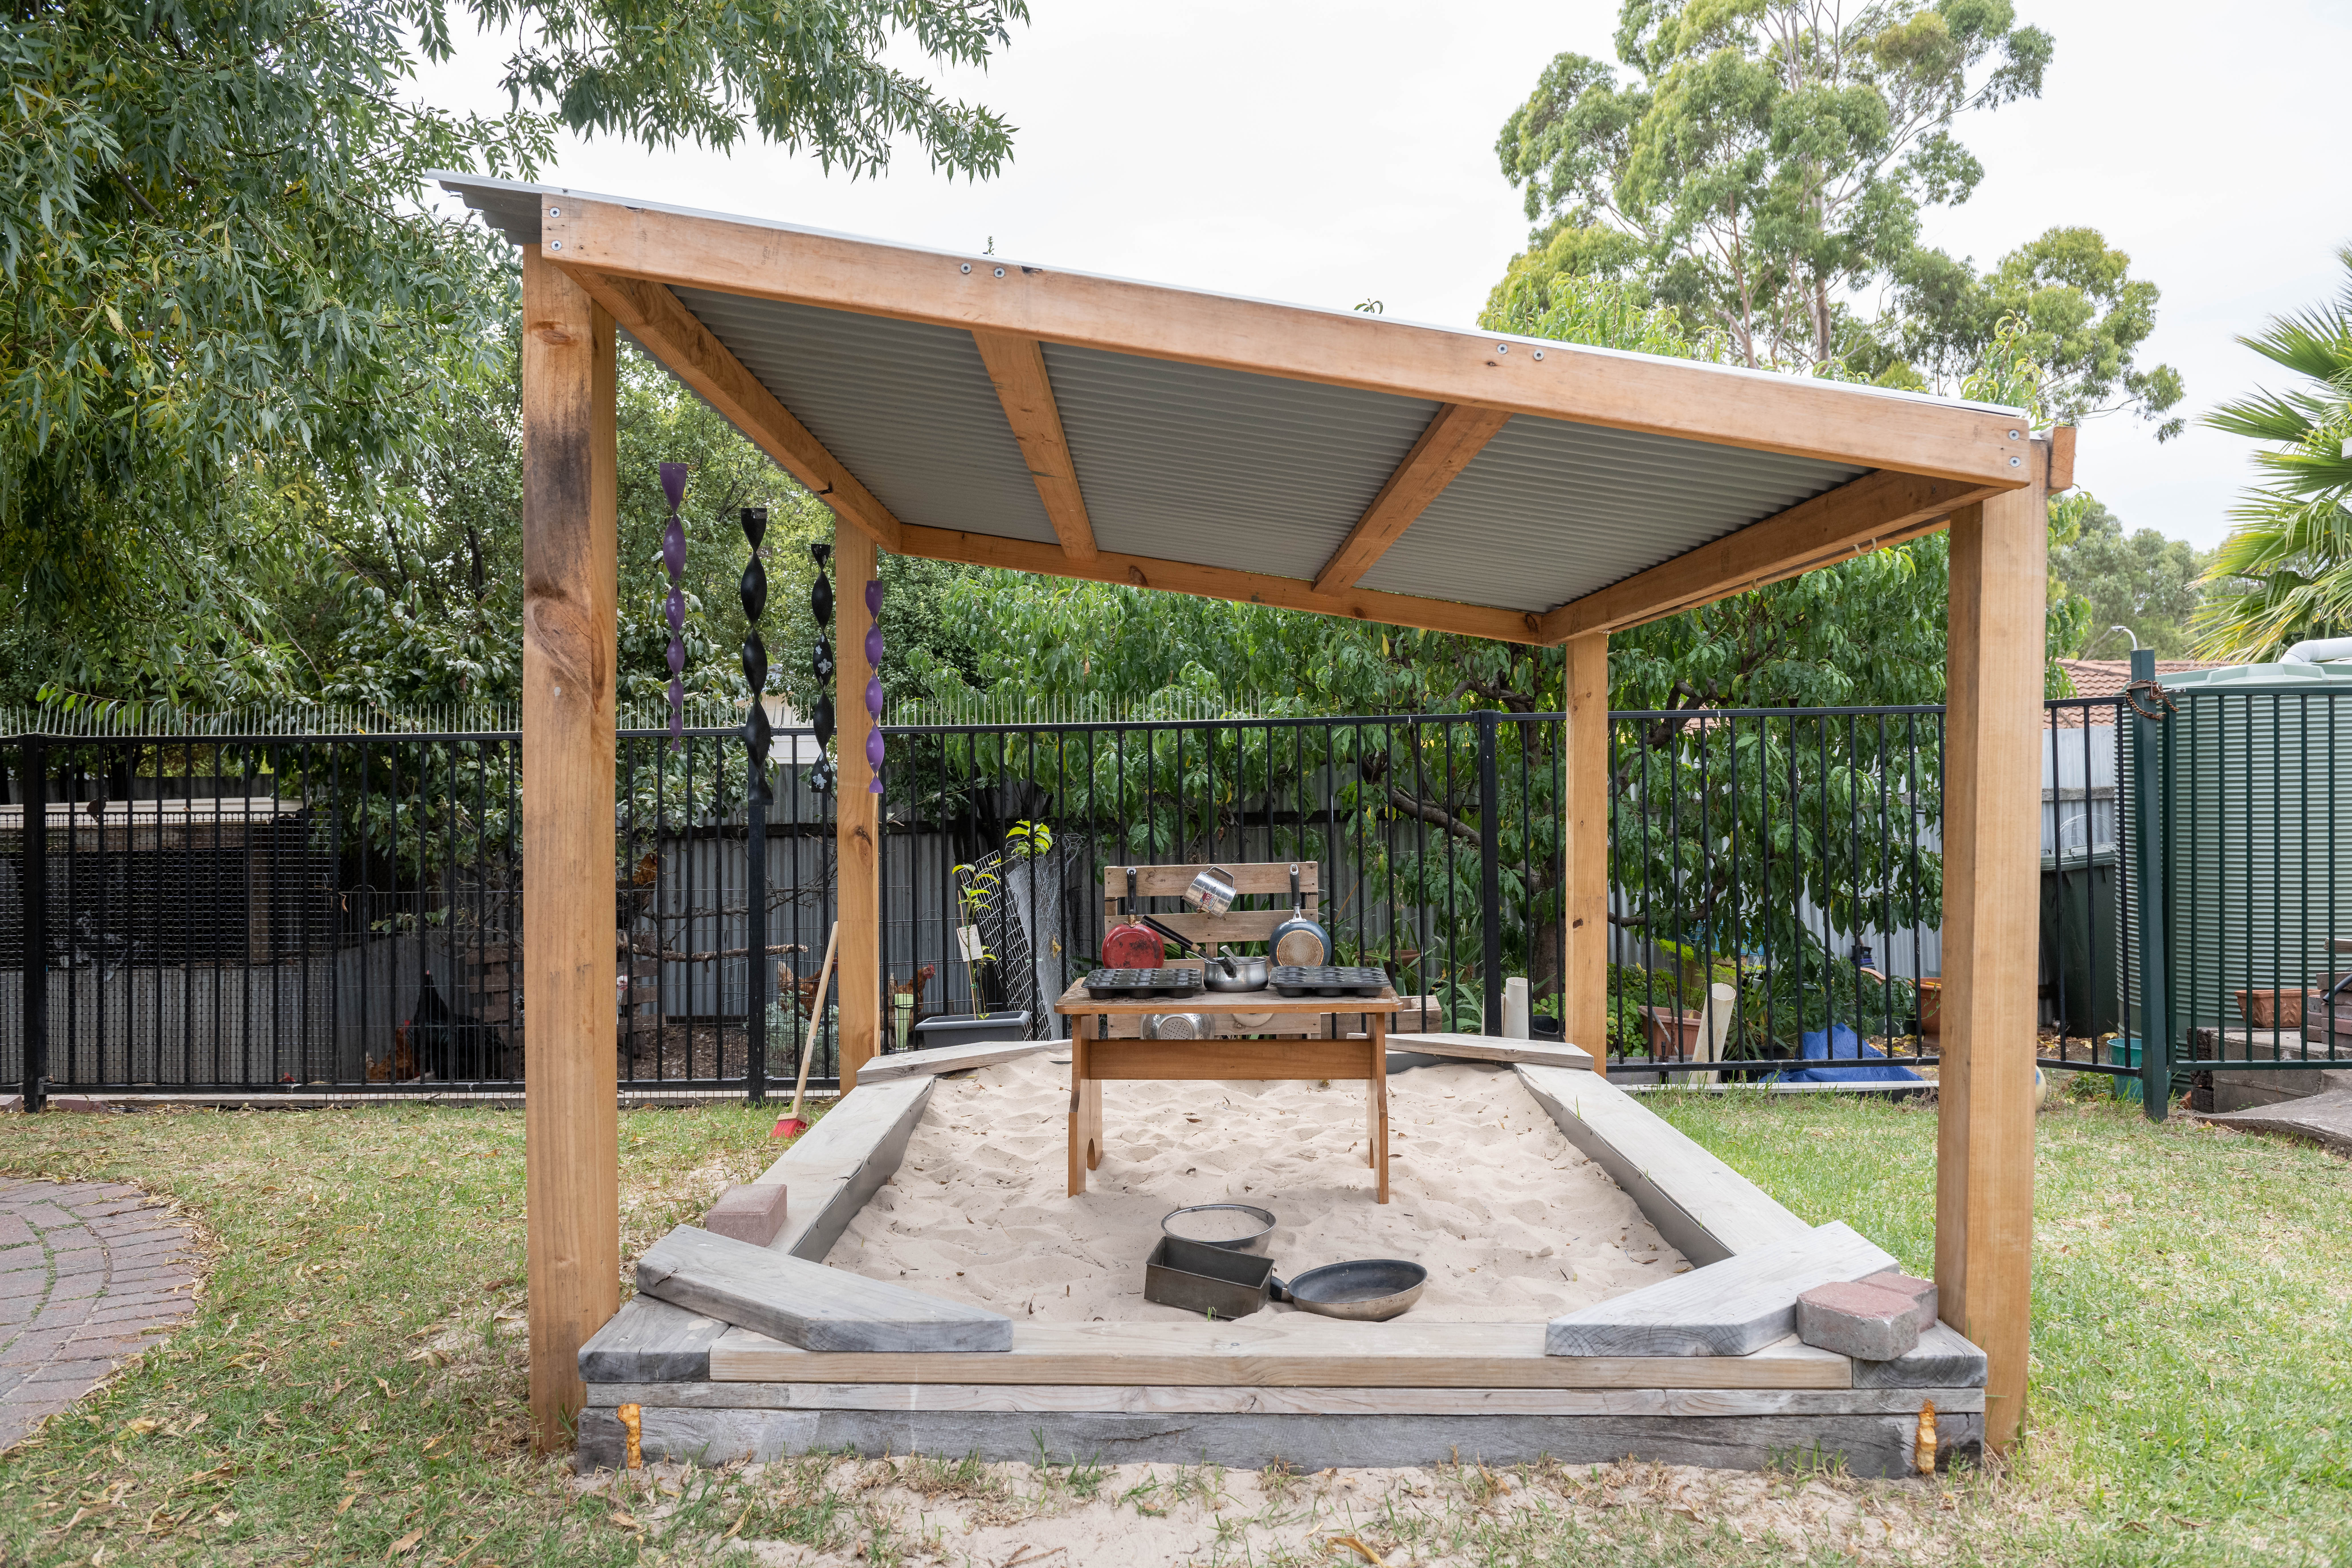 family day care setting – covered outdoor sandpit area